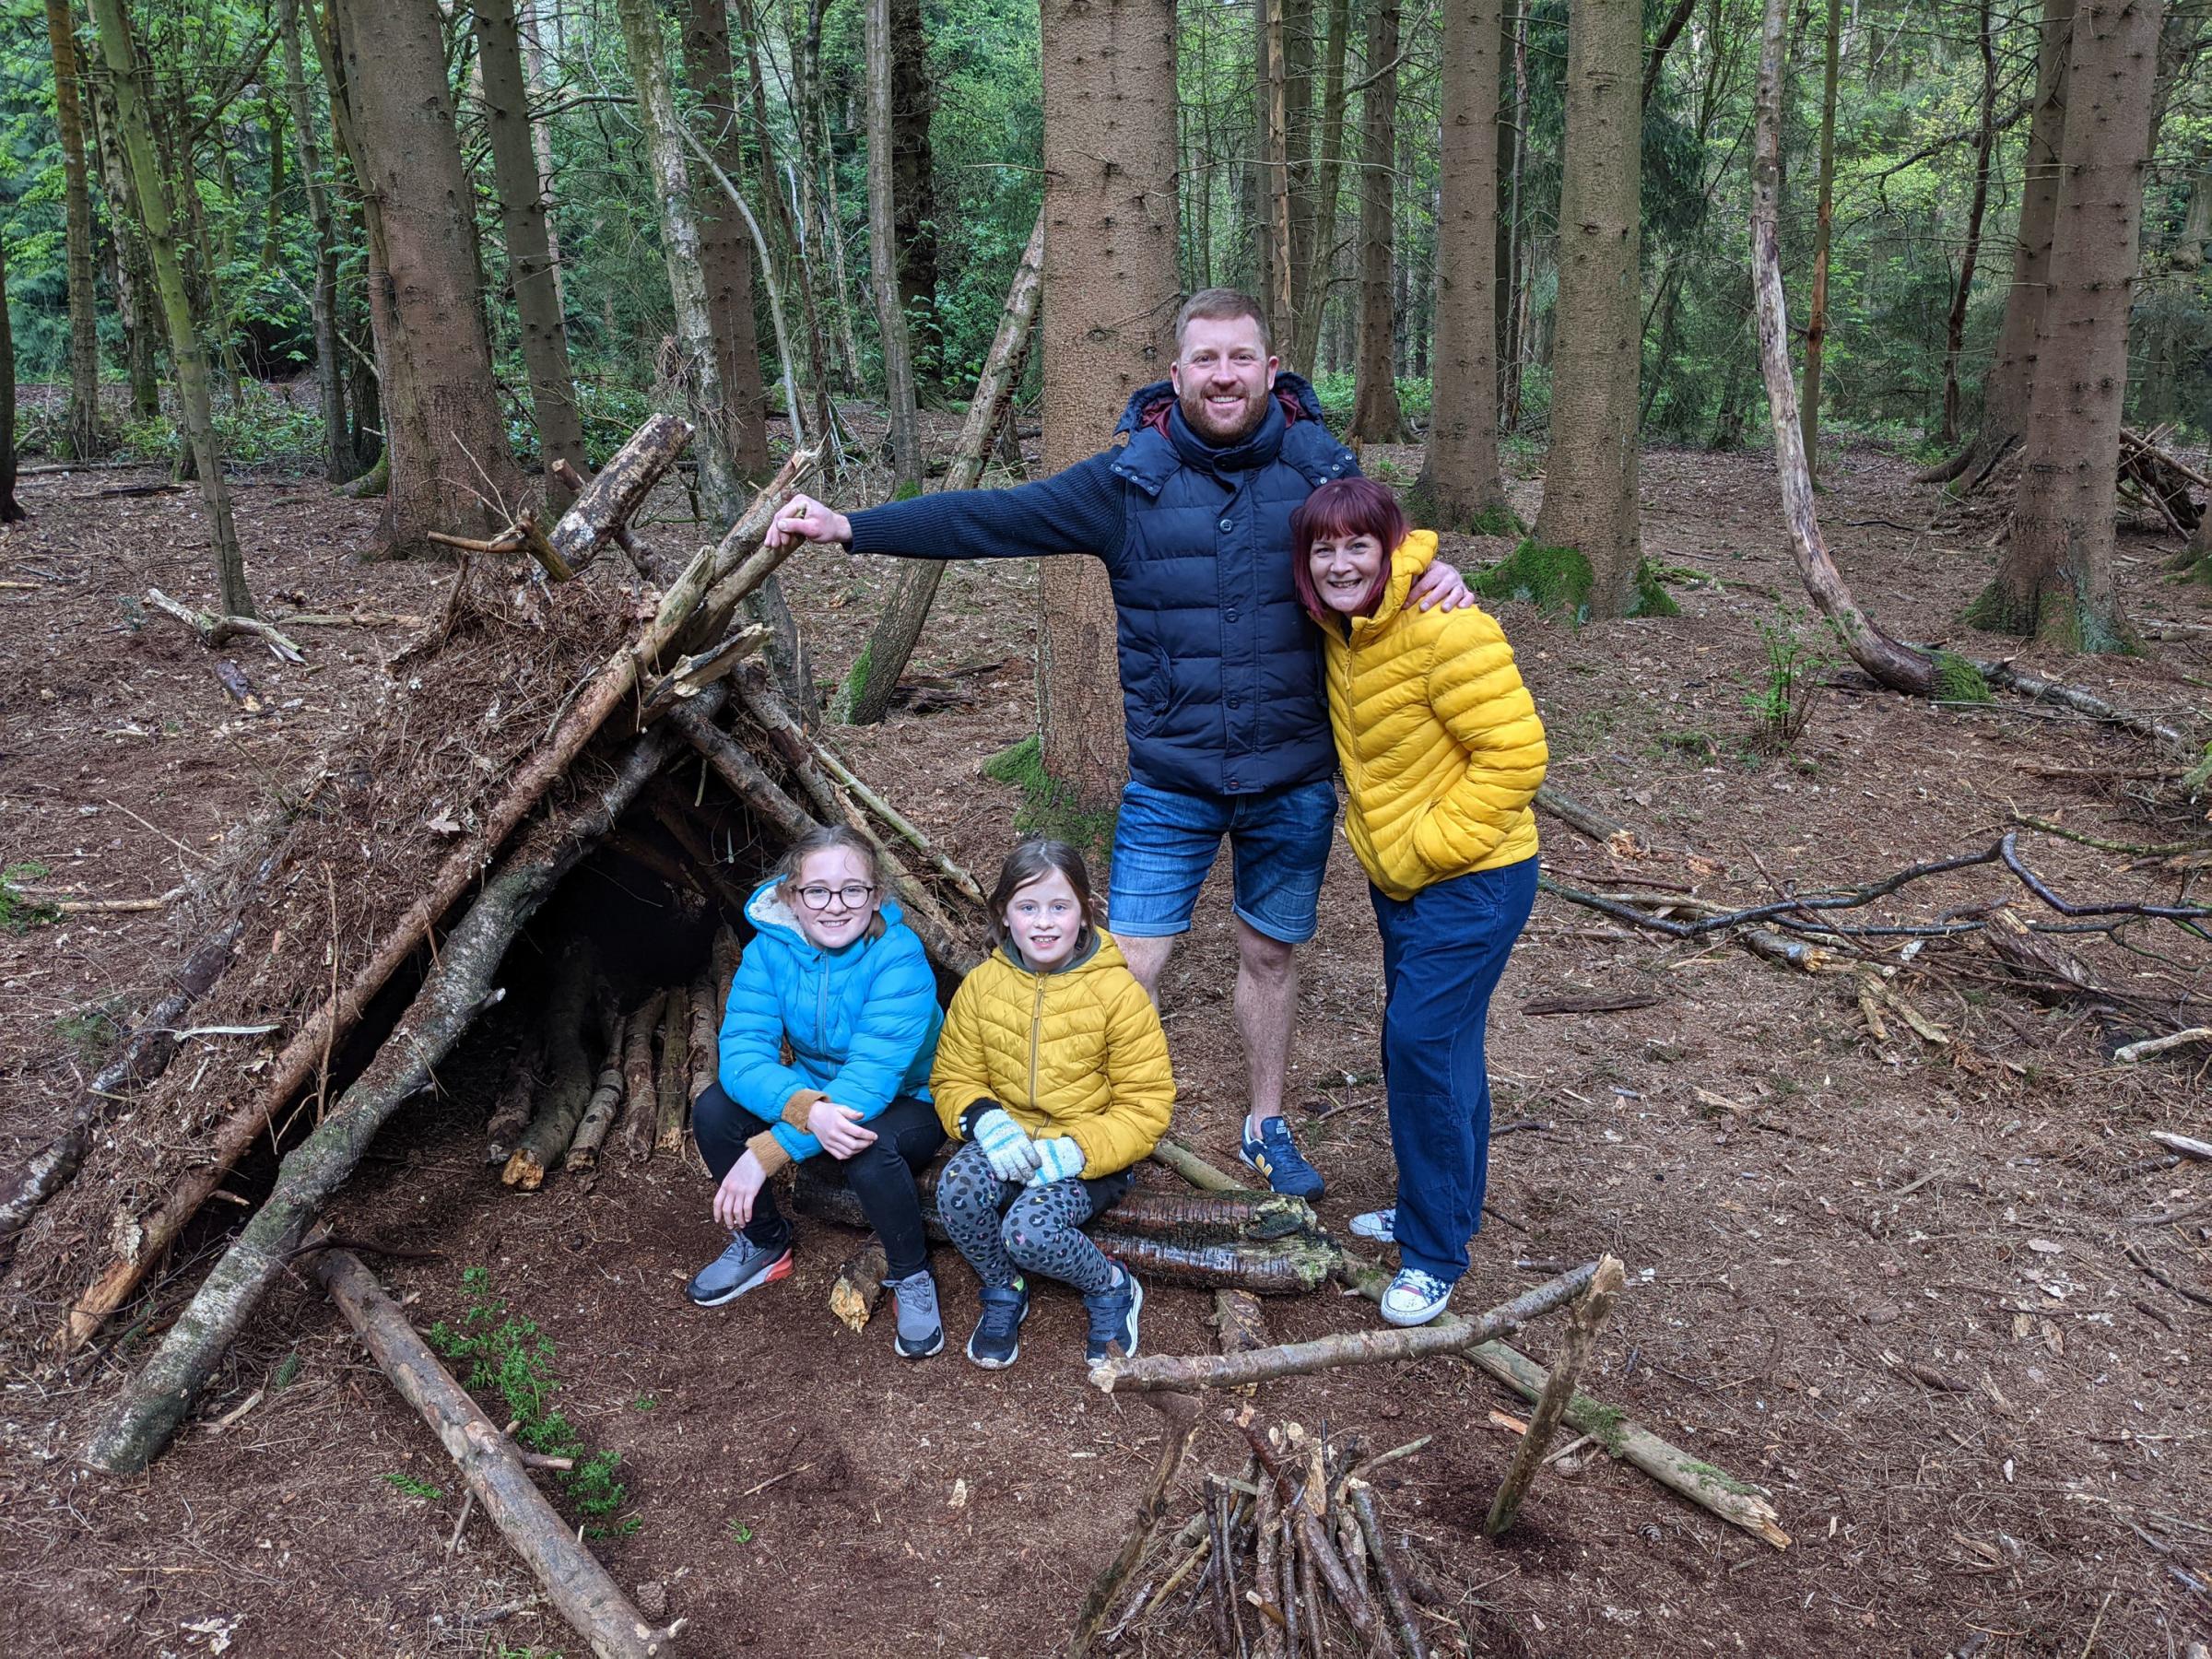 Claire Spreadbury and her family, outside the den they built in the forest. Photo: Claire Spreadbury/PA